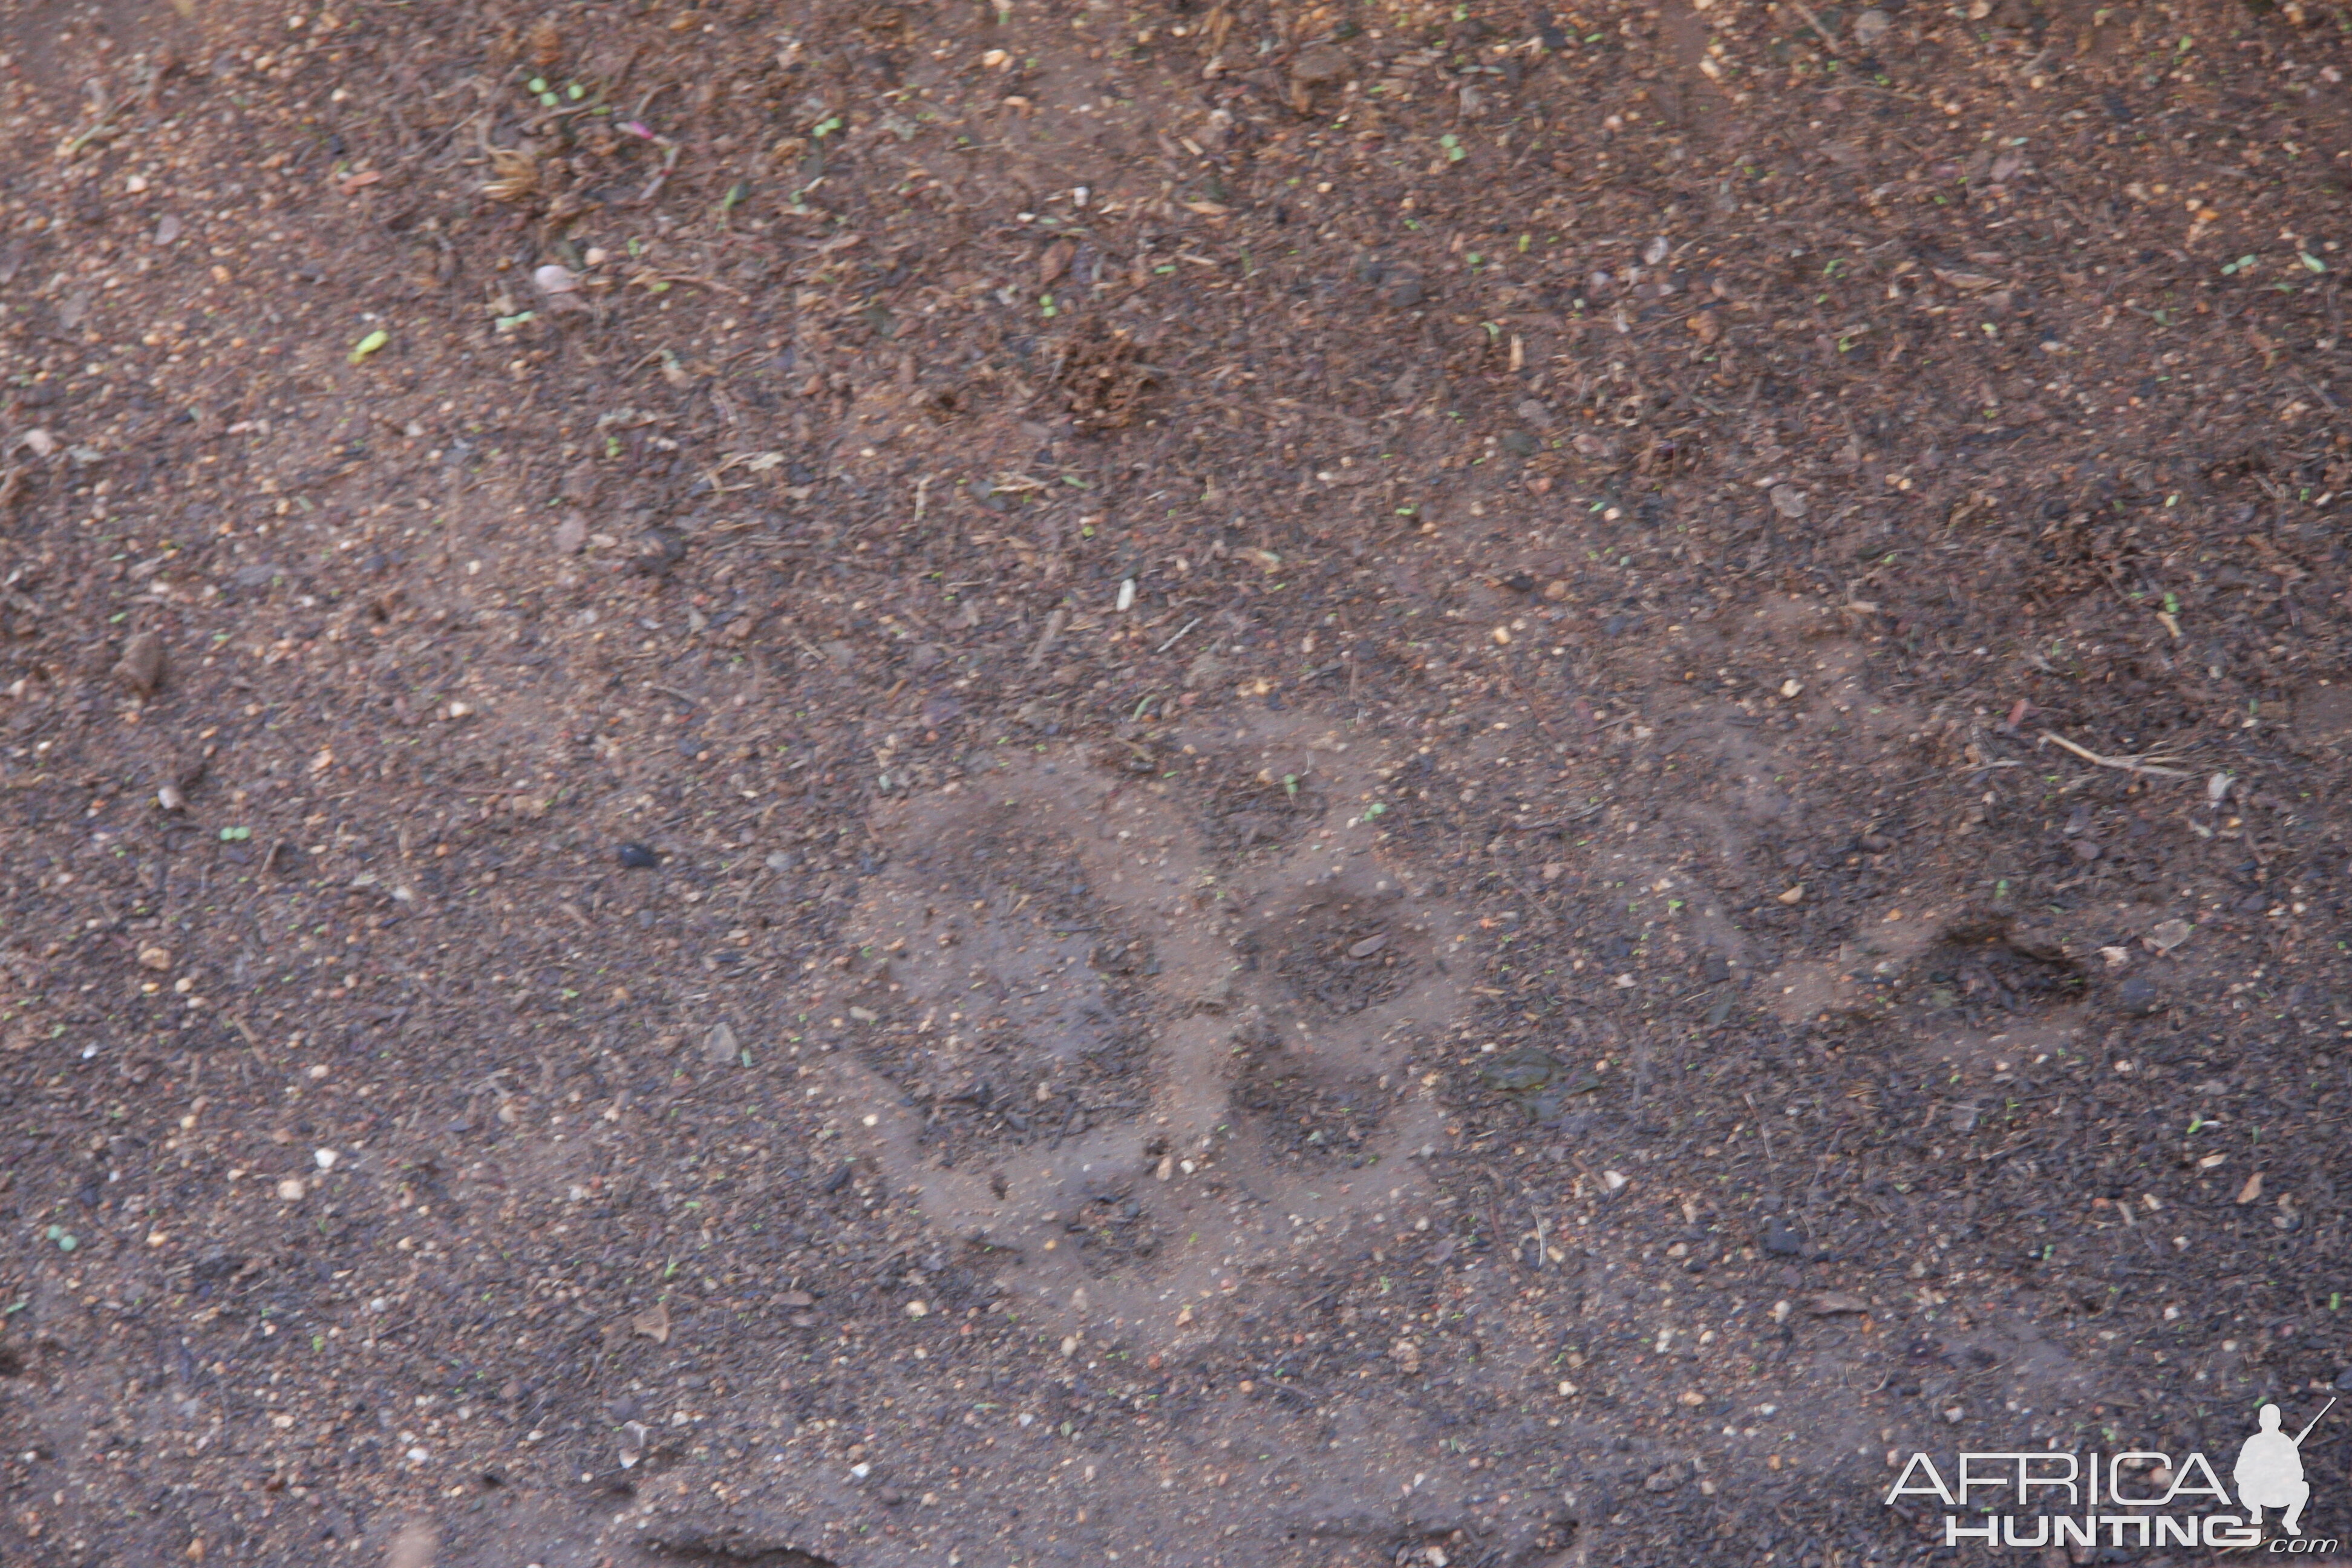 Leopard tracks after the rain Namibia